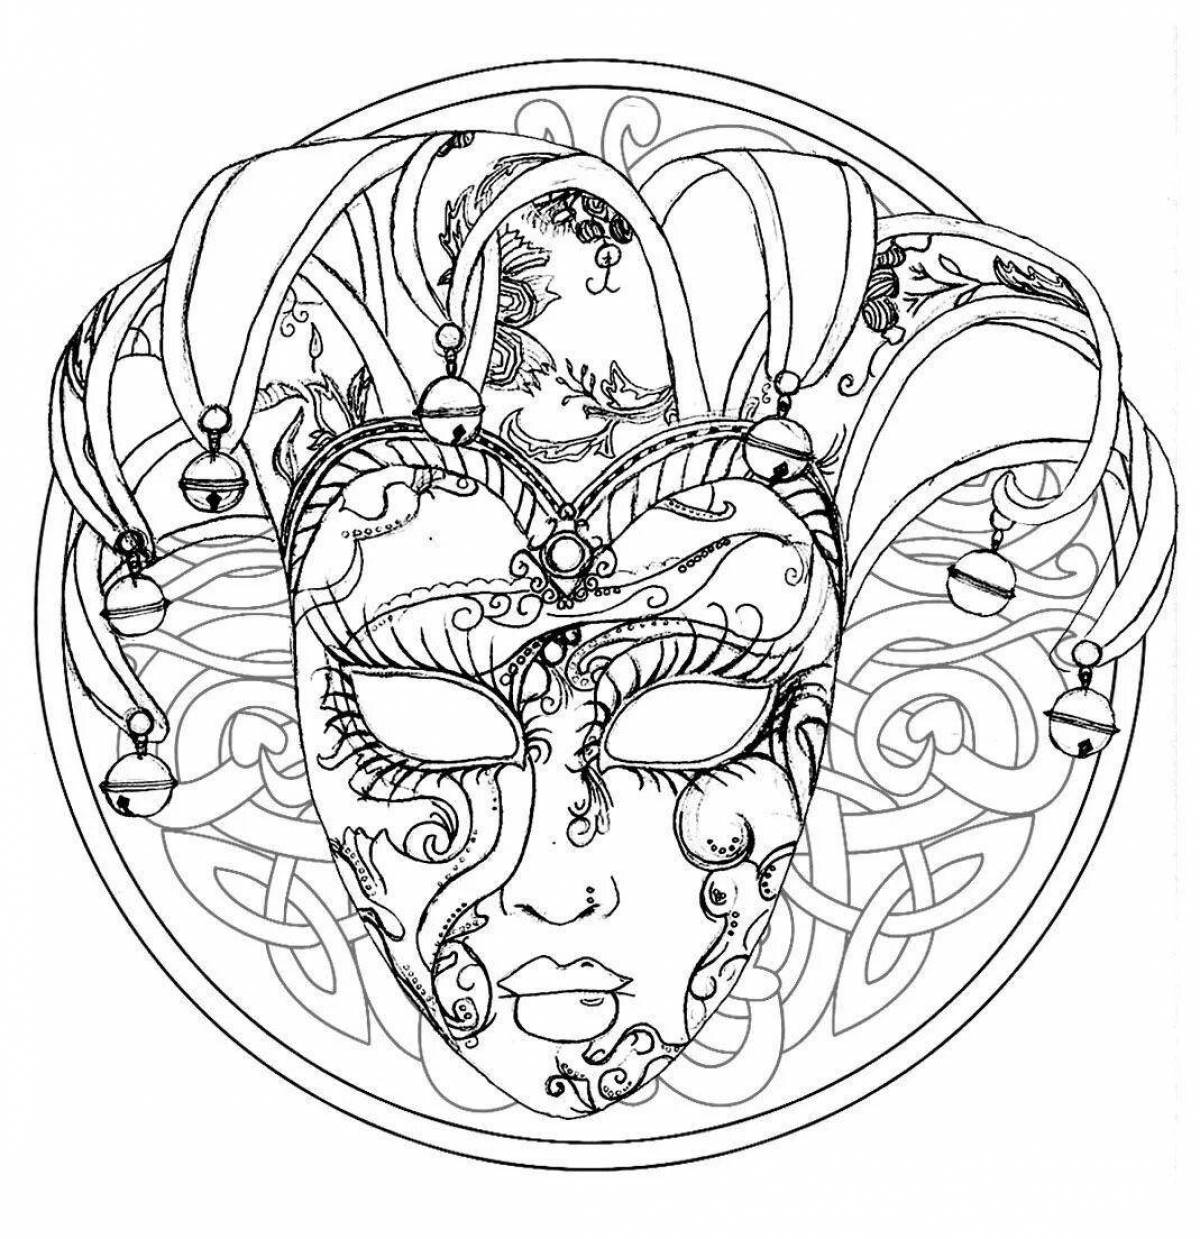 Coloring mystical theatrical mask